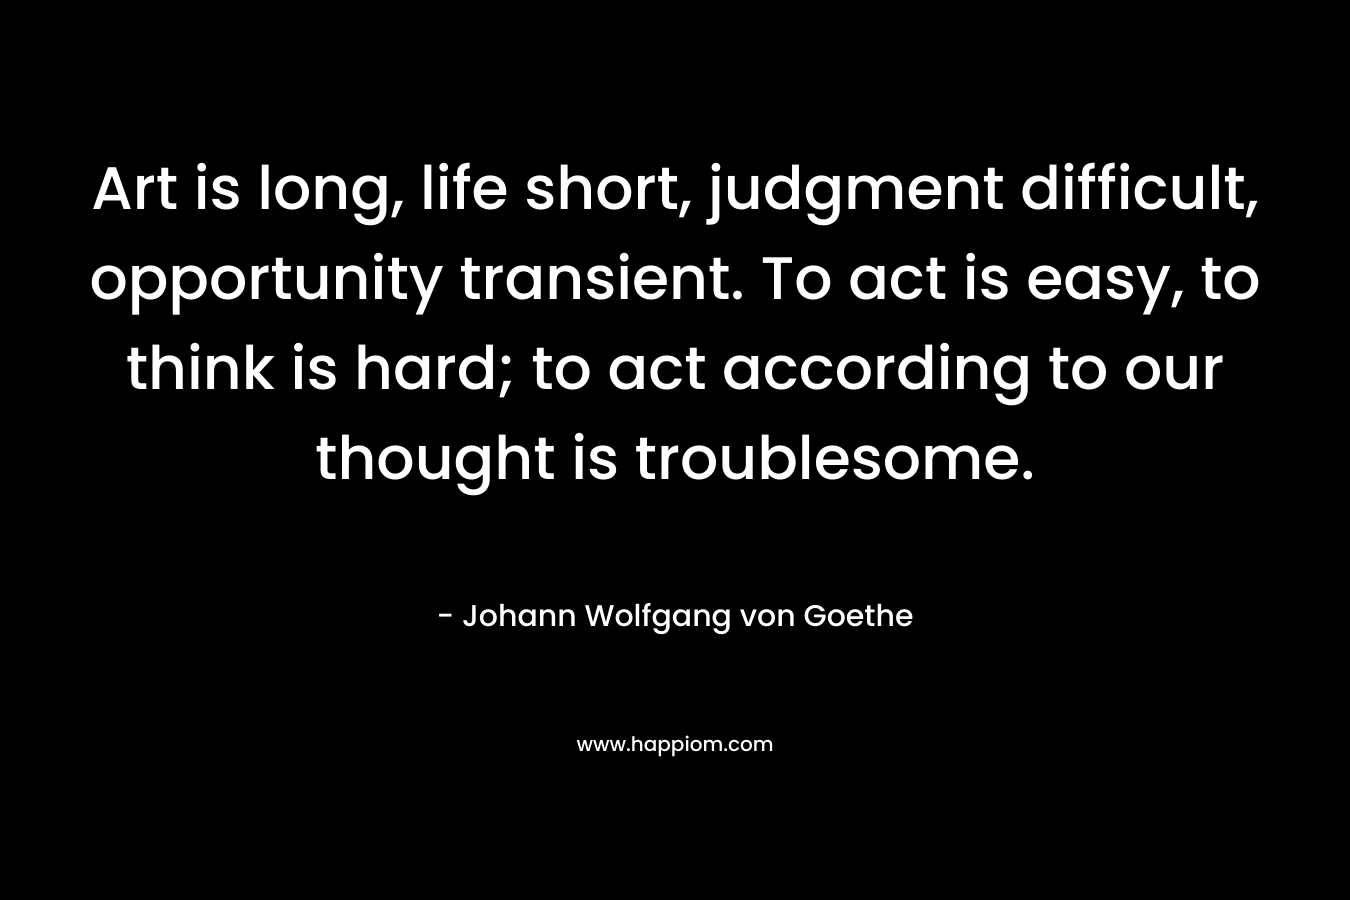 Art is long, life short, judgment difficult, opportunity transient. To act is easy, to think is hard; to act according to our thought is troublesome. – Johann Wolfgang von Goethe